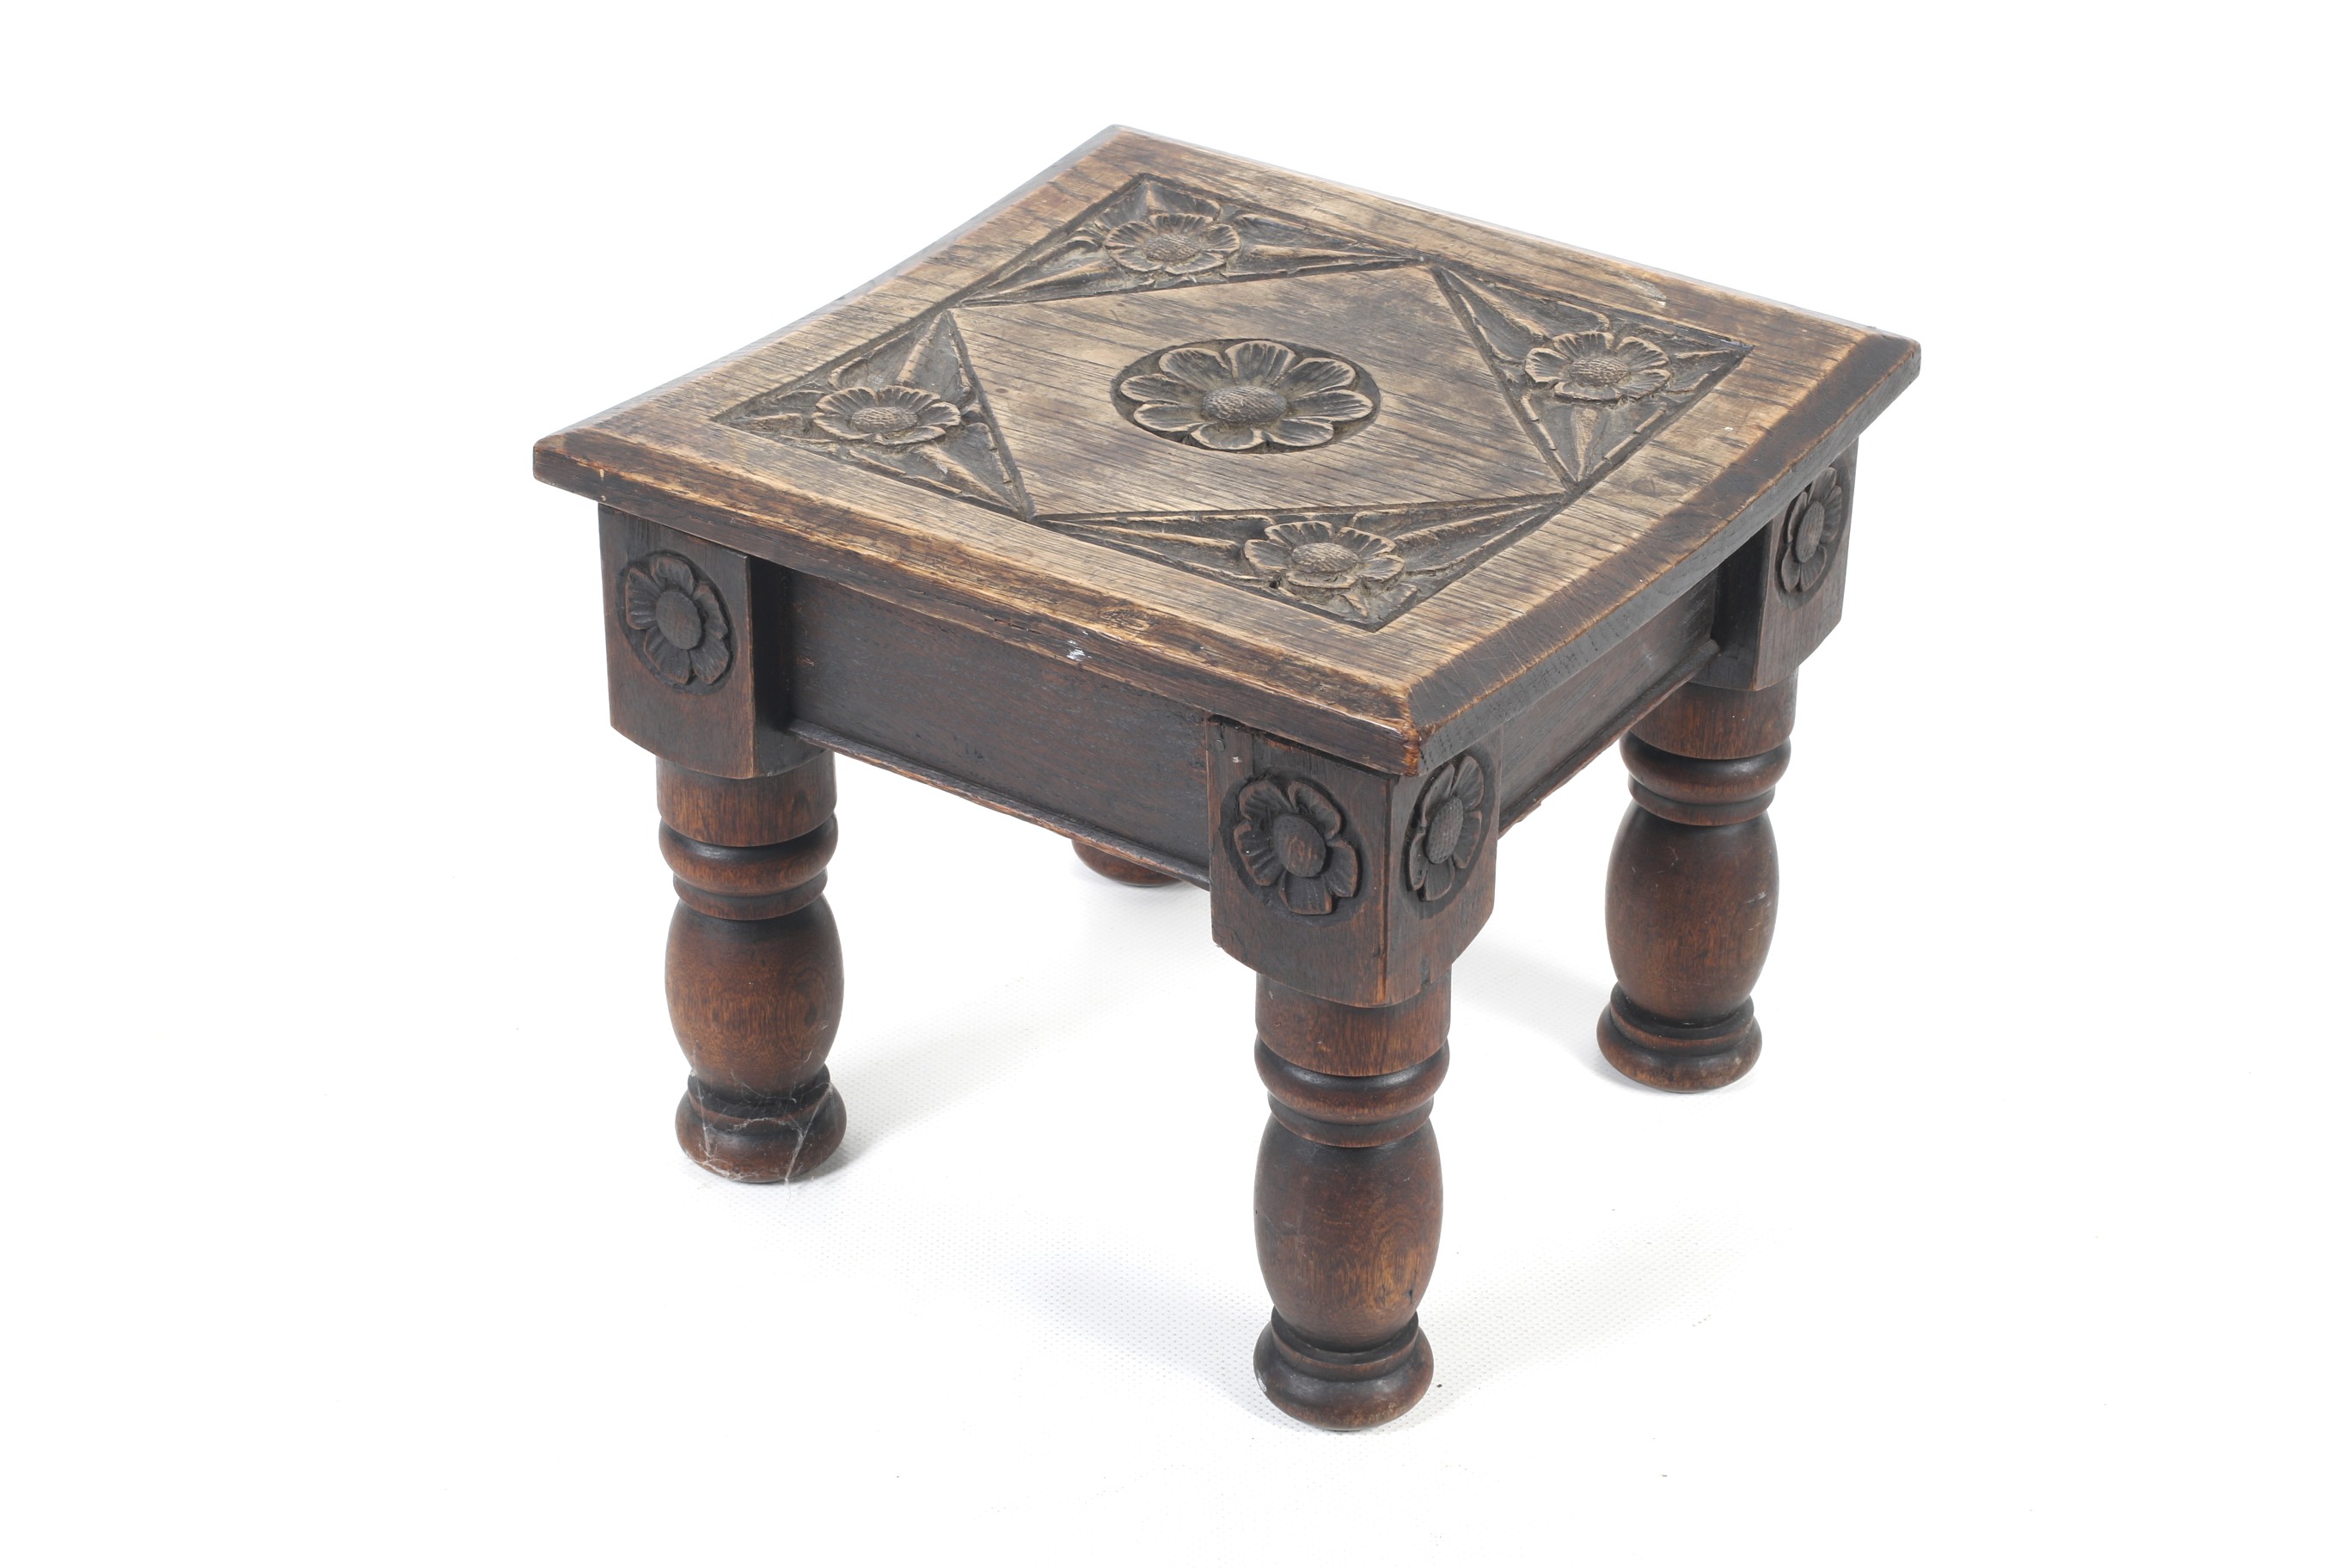 A 19th century carved oak stool from Street Church, Somerset.